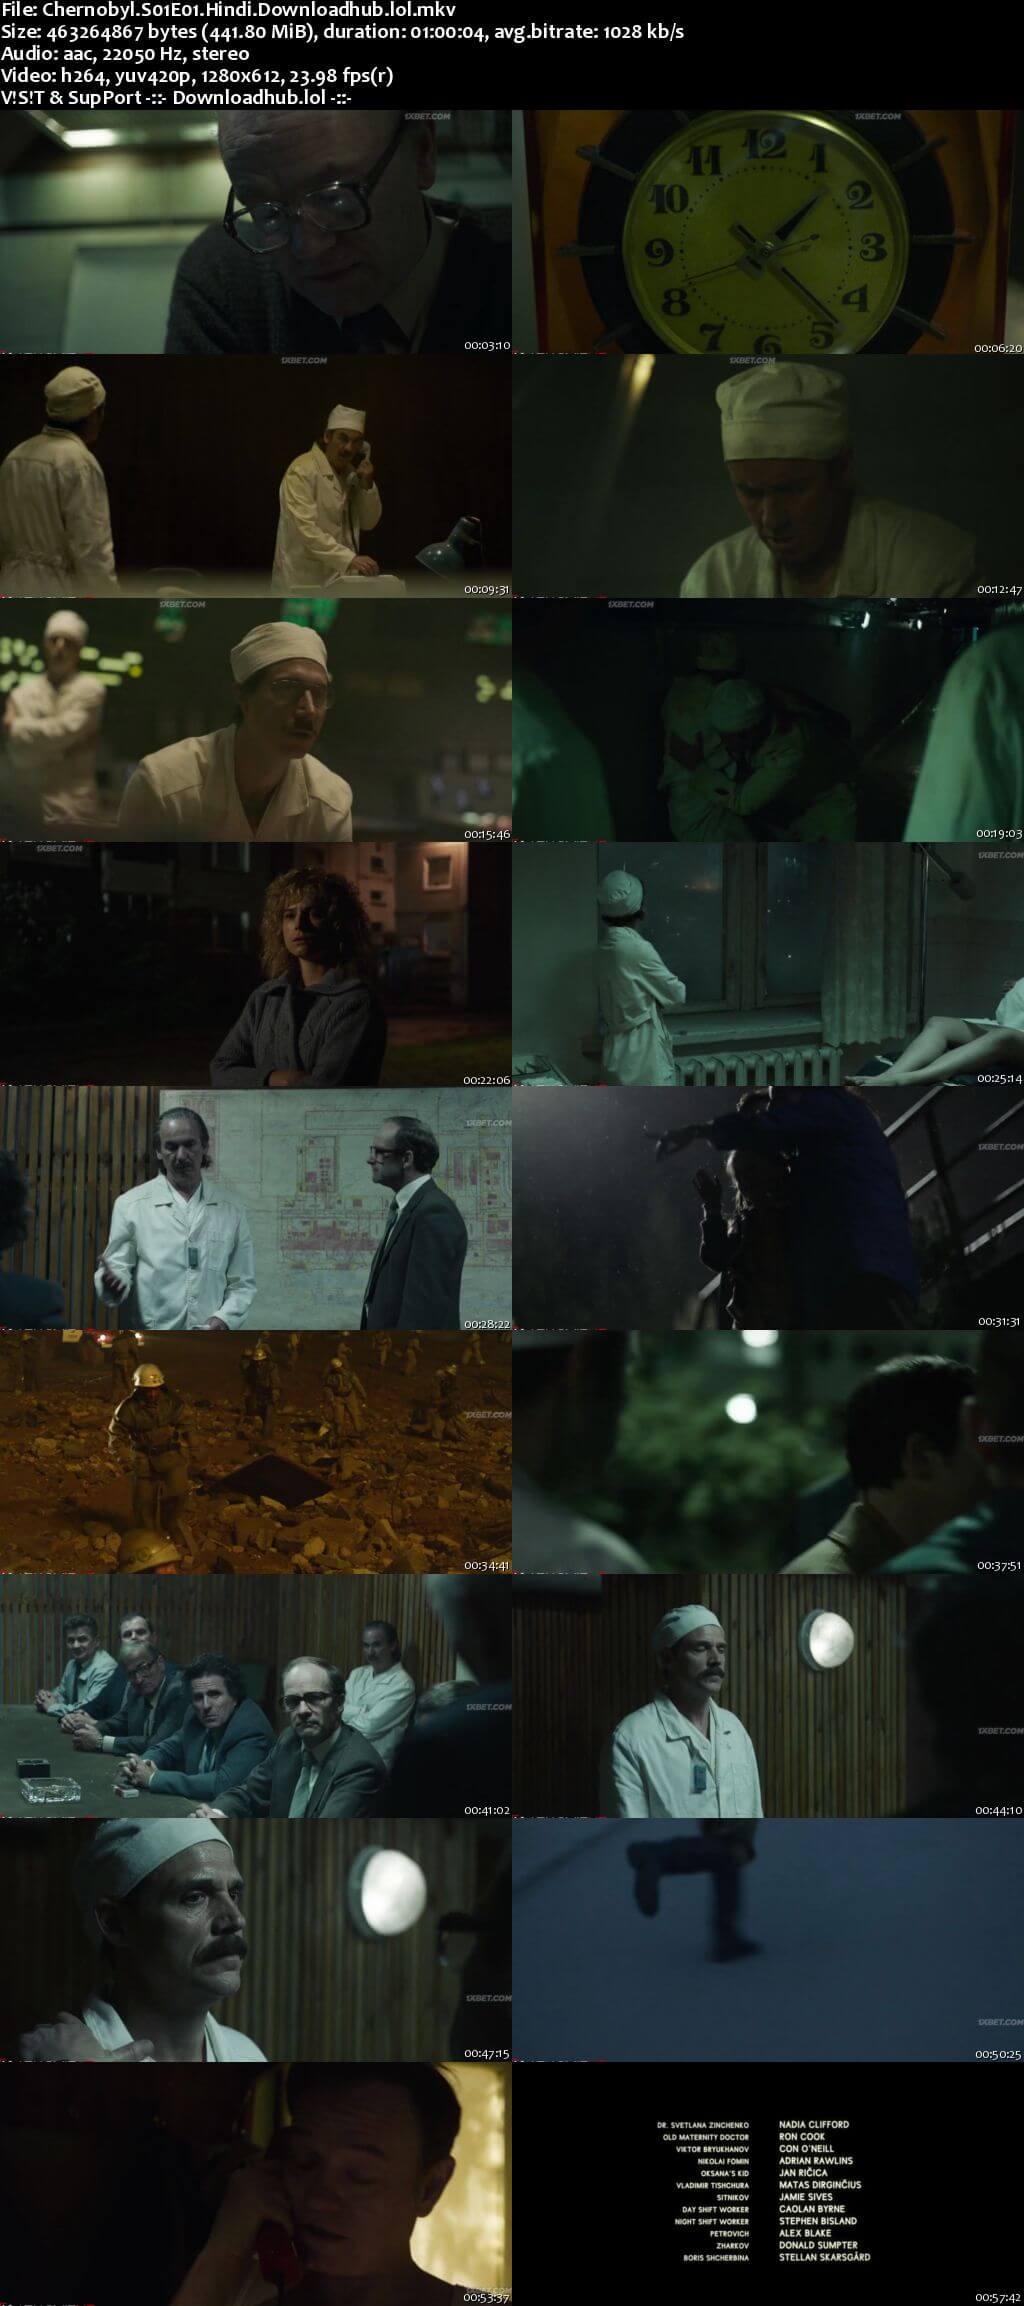 Chernobyl 2019 S01 Complete Hindi Dubbed 720p HDRip x264